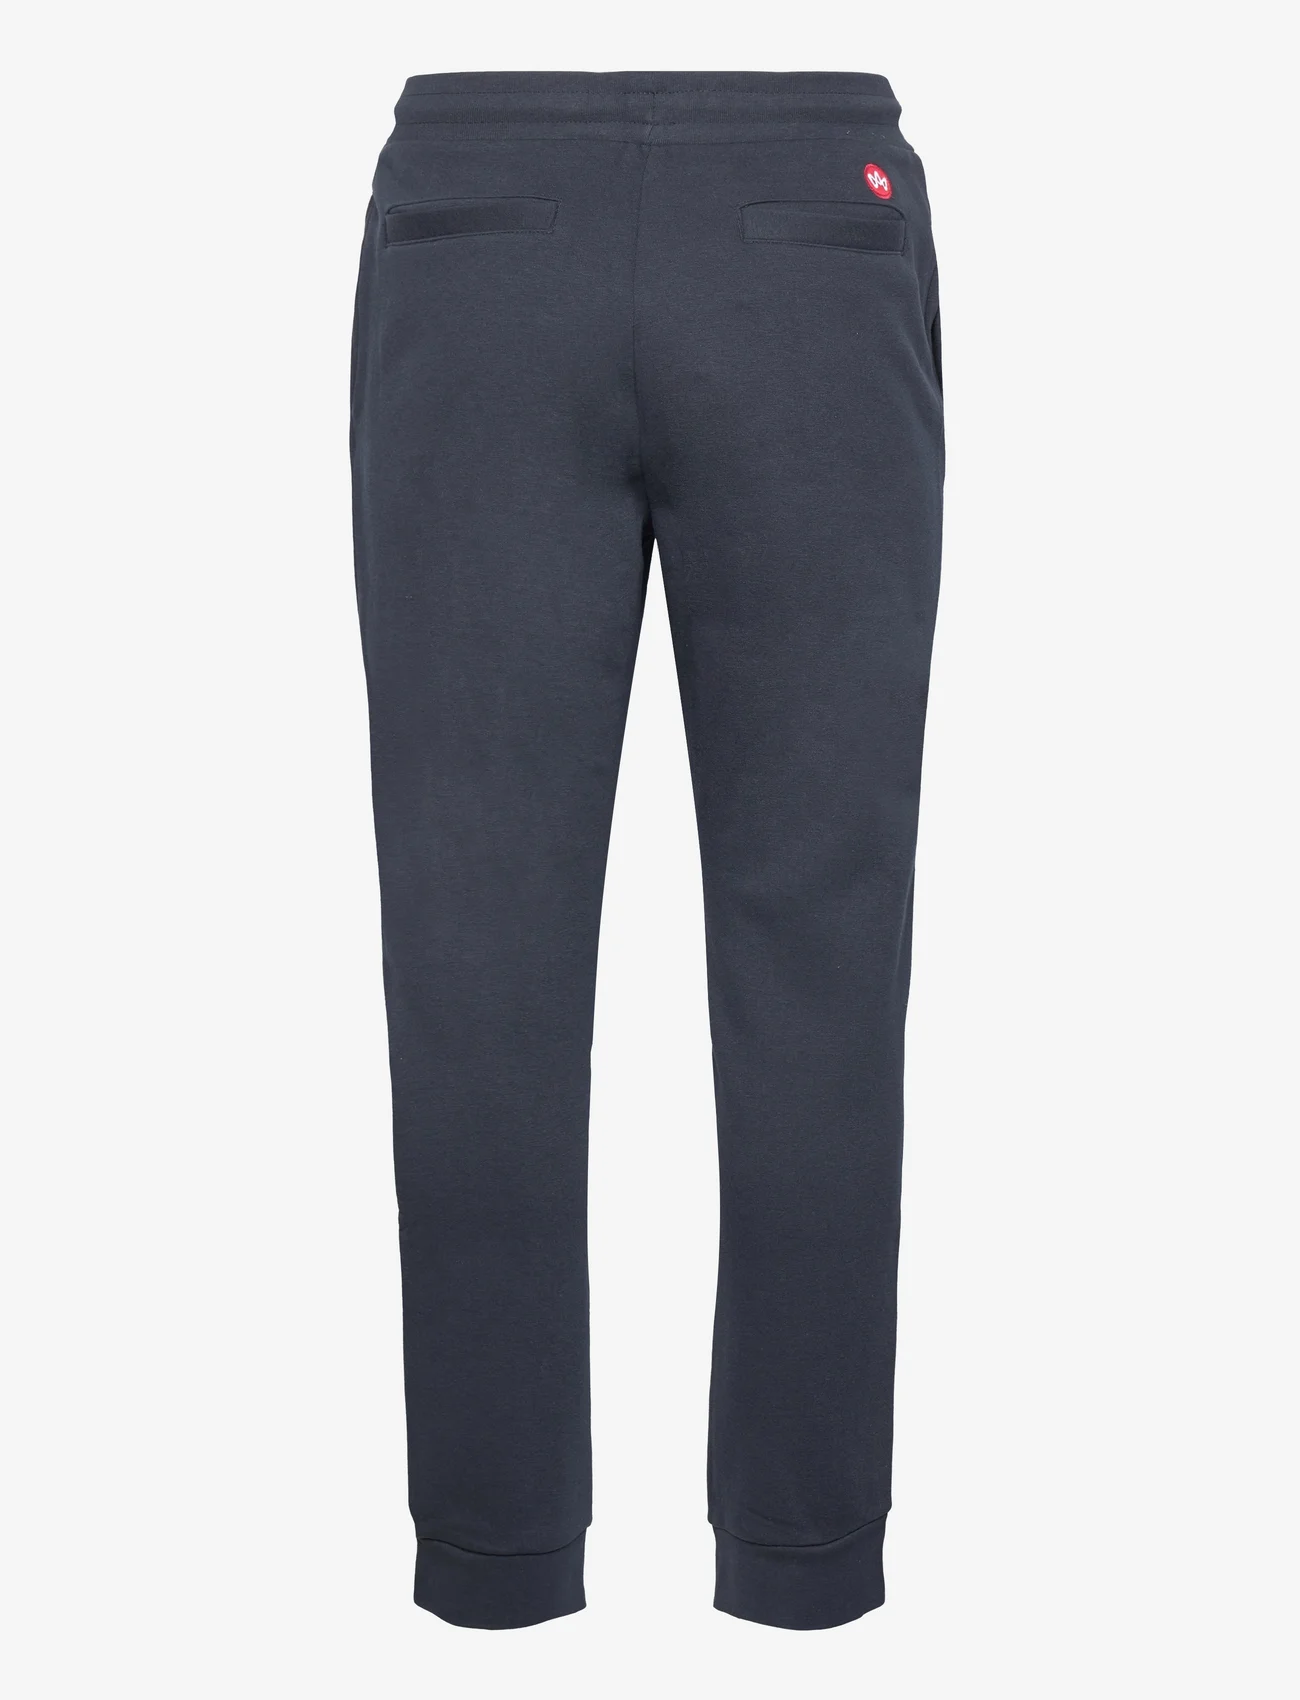 Kronstadt - Knox Organic/Recycled sweat pants - mehed - navy - 1